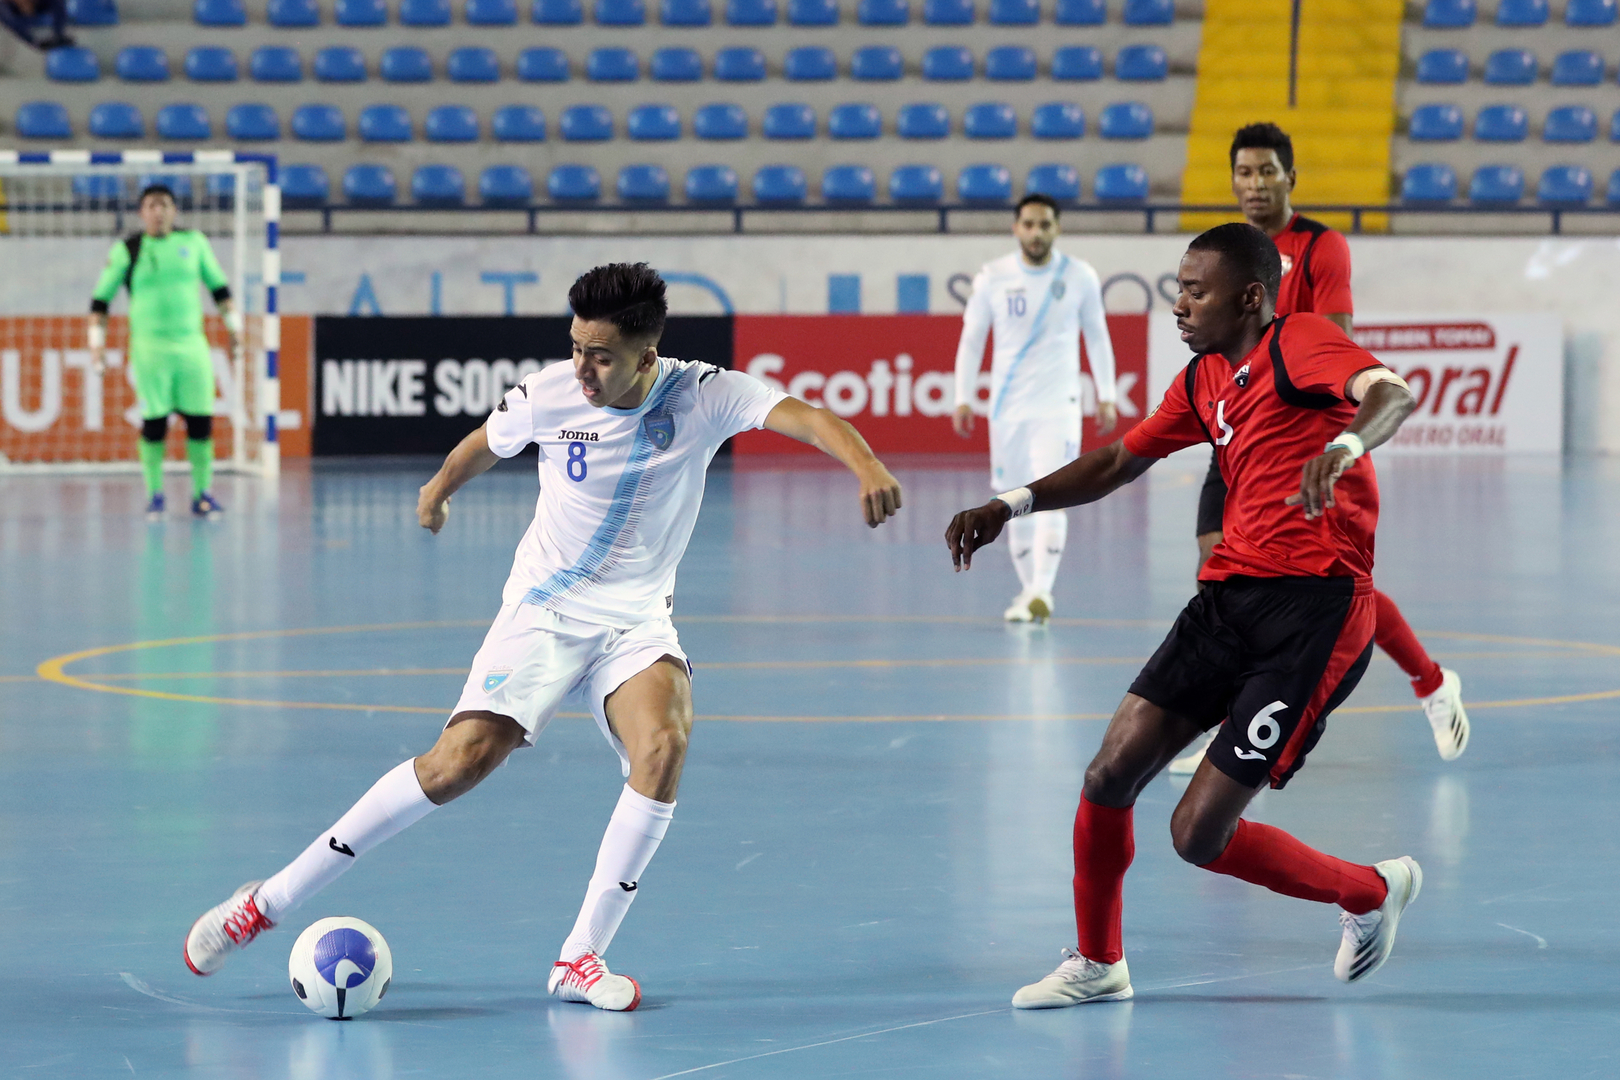 TT eliminated from CONCACAF Futsal Championships after 4-3 loss to Guatemala